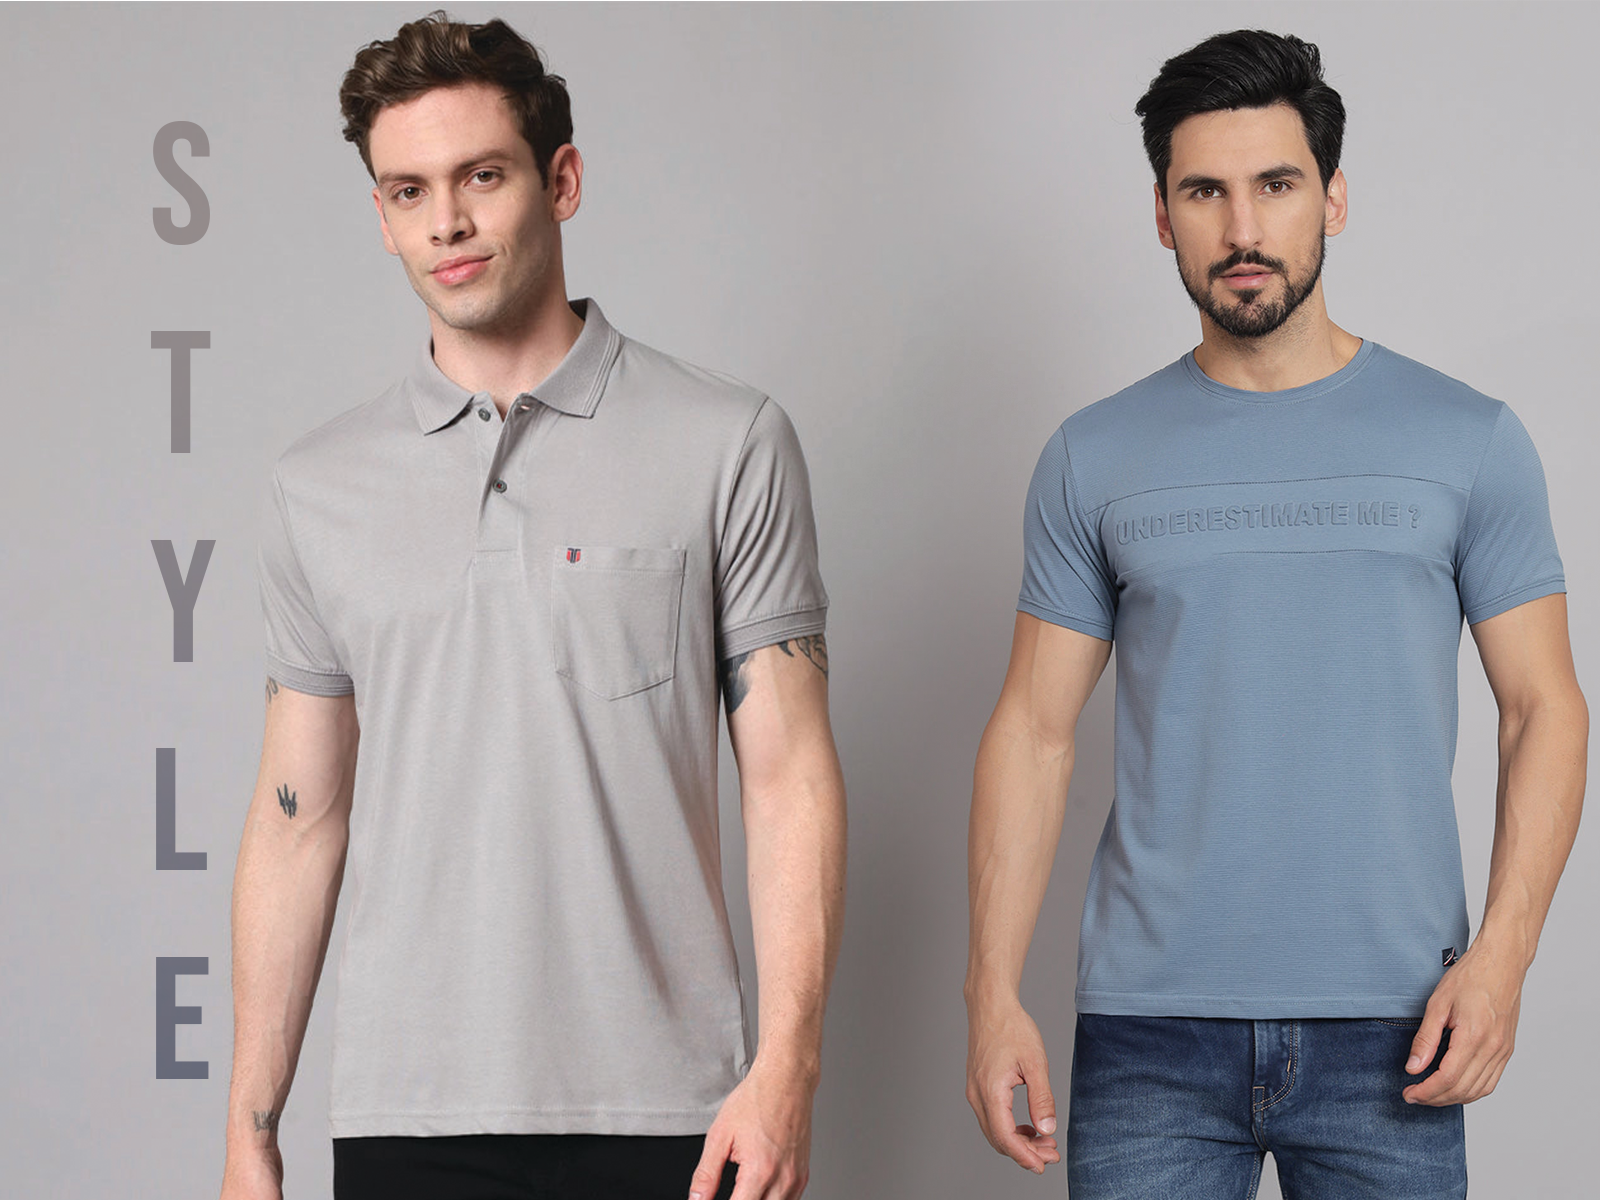 Most Popular T-shirt Neck Styles Every Man Should Know